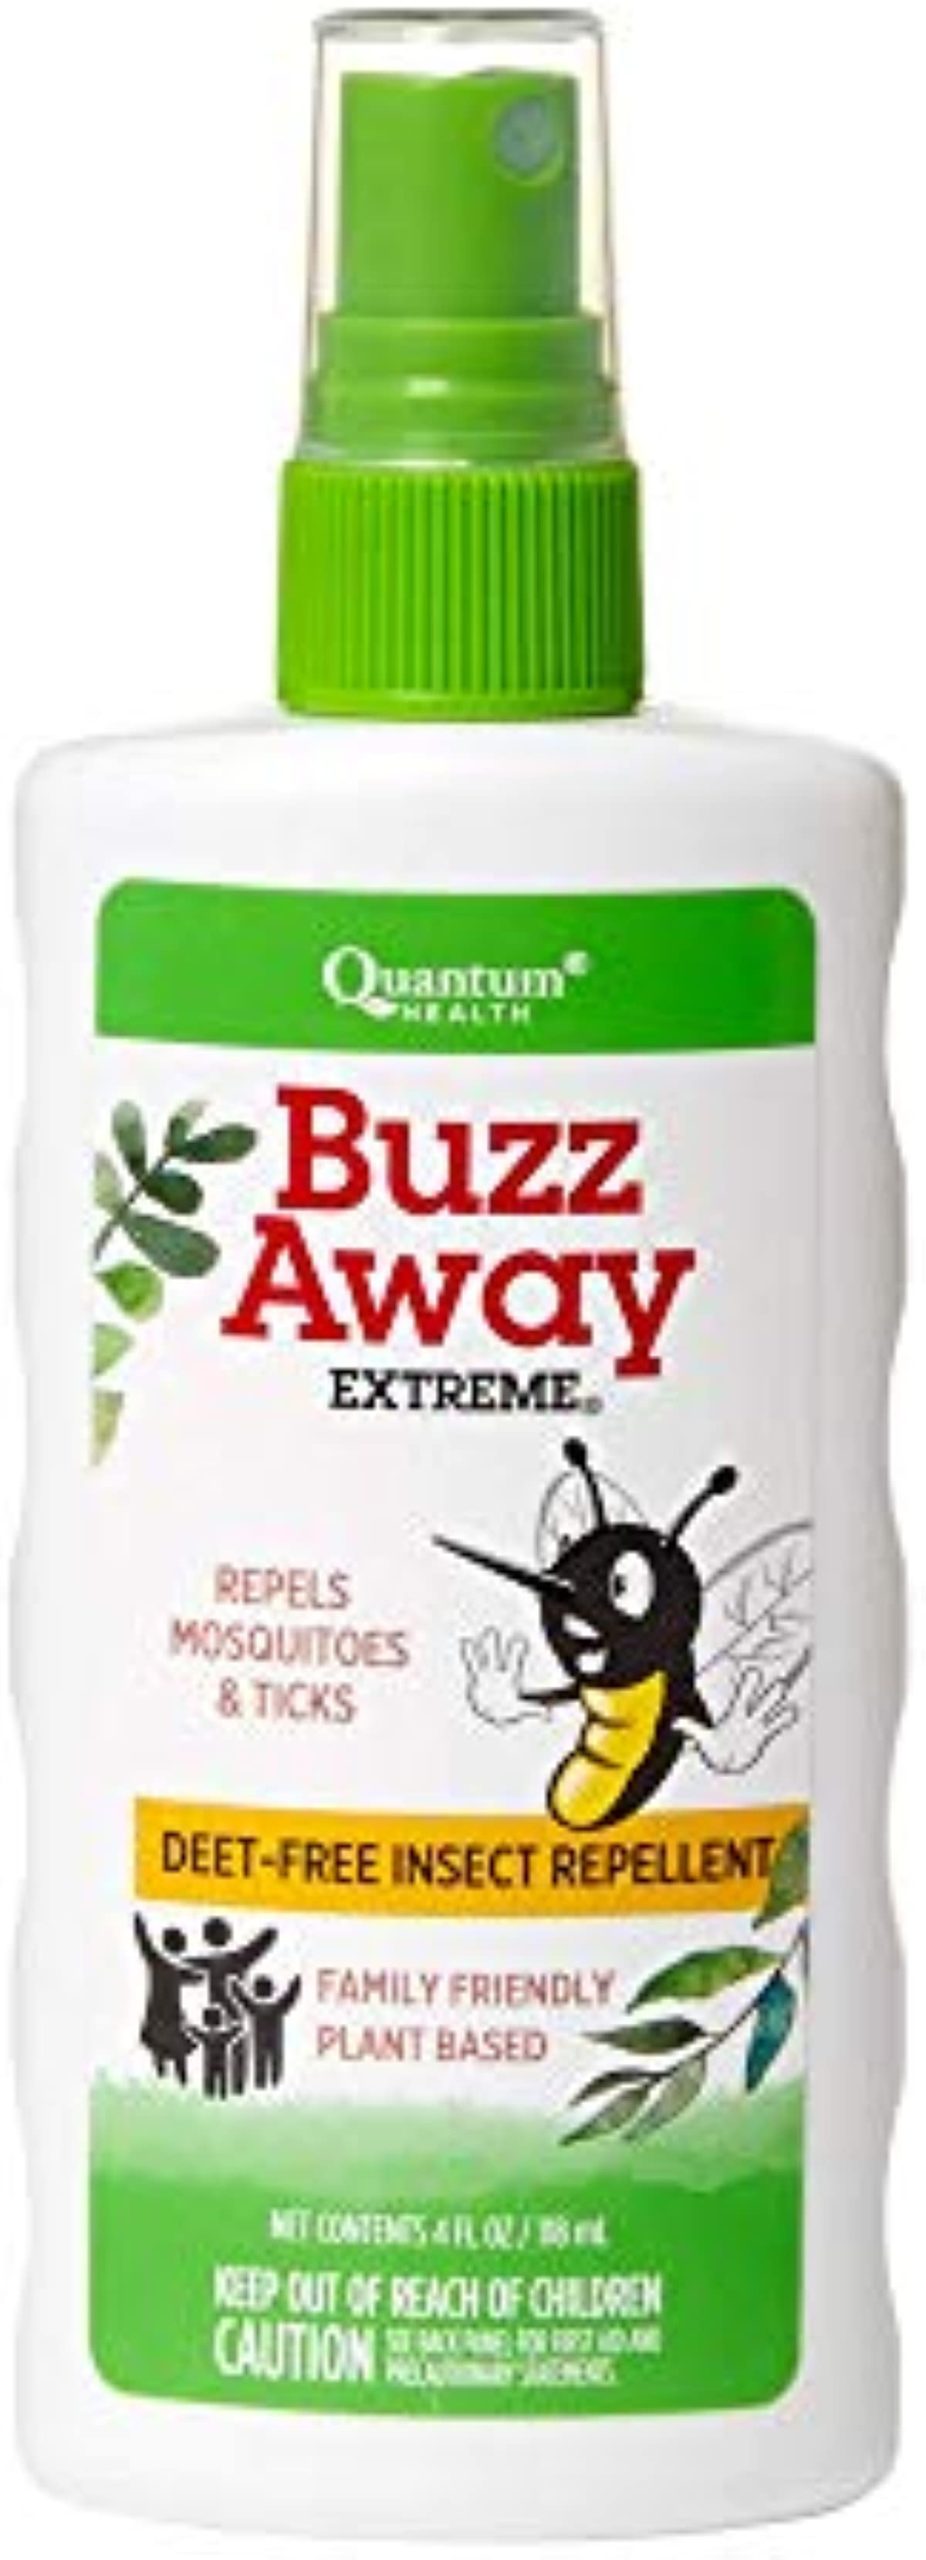 Quantum Health Buzz Away Extreme - DEET-free Insect Repellent, Essential Oil Bug Spray - Small Children and Up, Travel Friendly, 4 Fl Oz